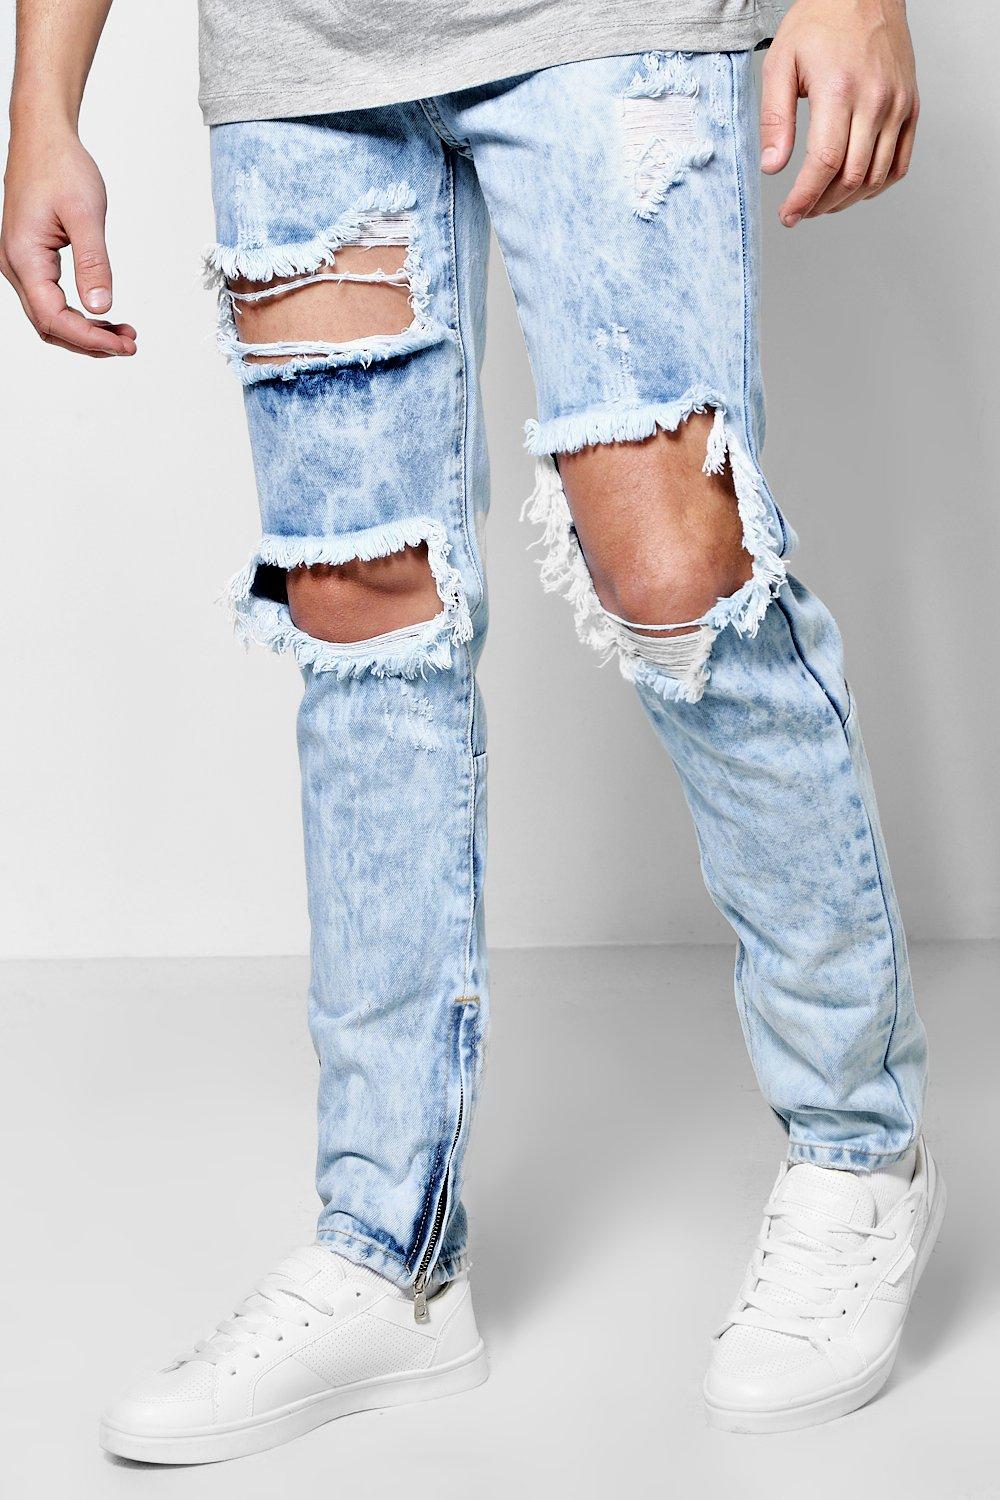 mens ripped jeans canada